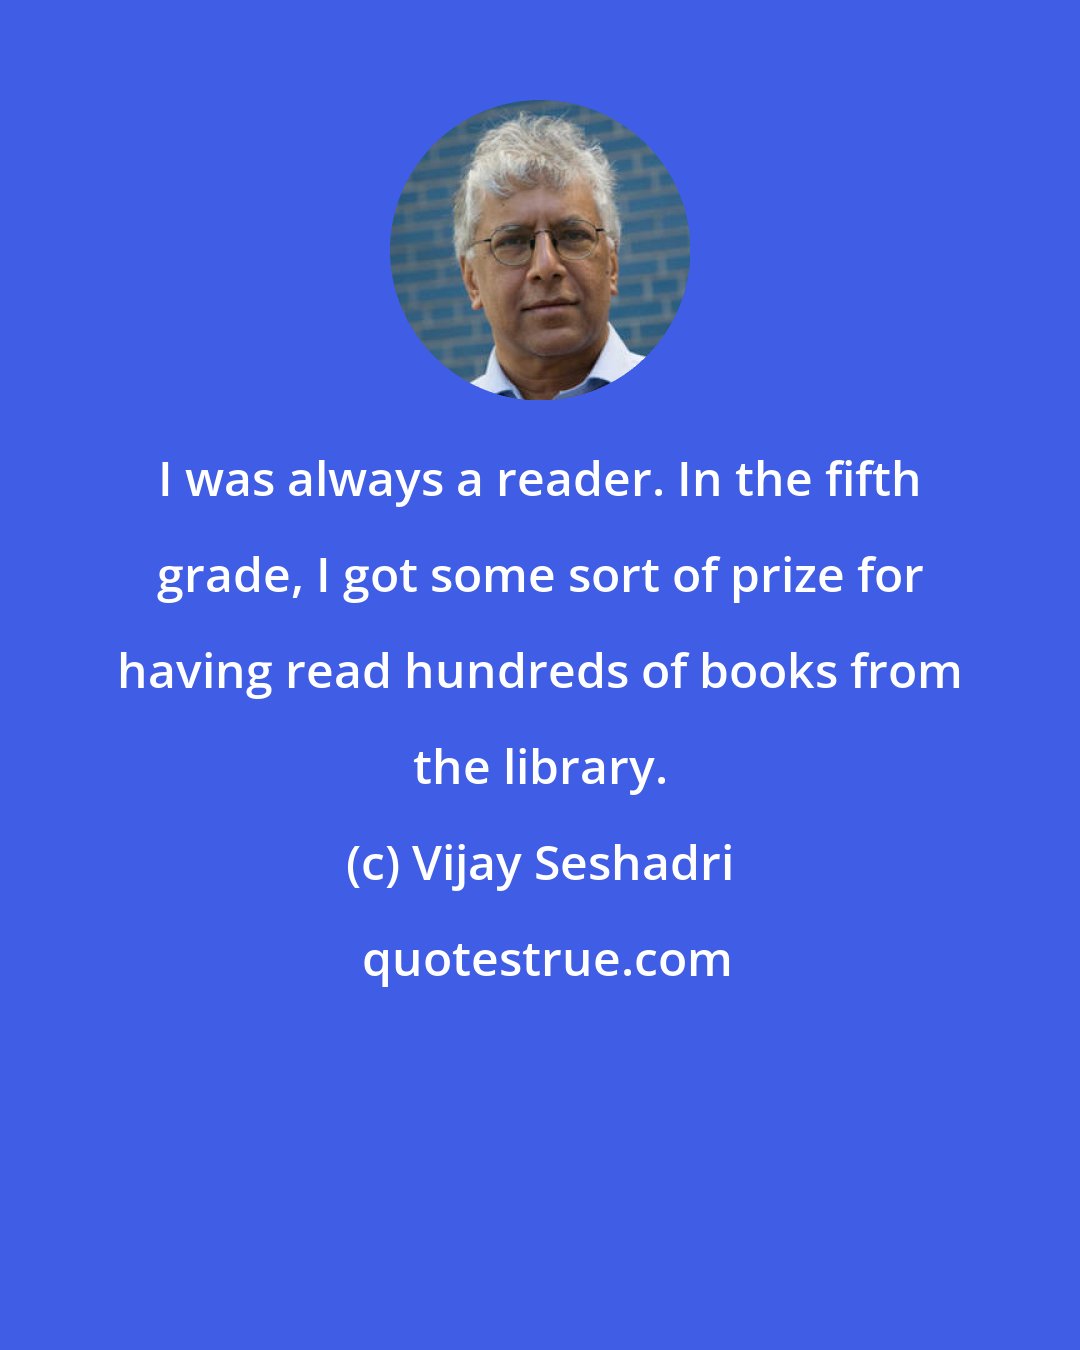 Vijay Seshadri: I was always a reader. In the fifth grade, I got some sort of prize for having read hundreds of books from the library.